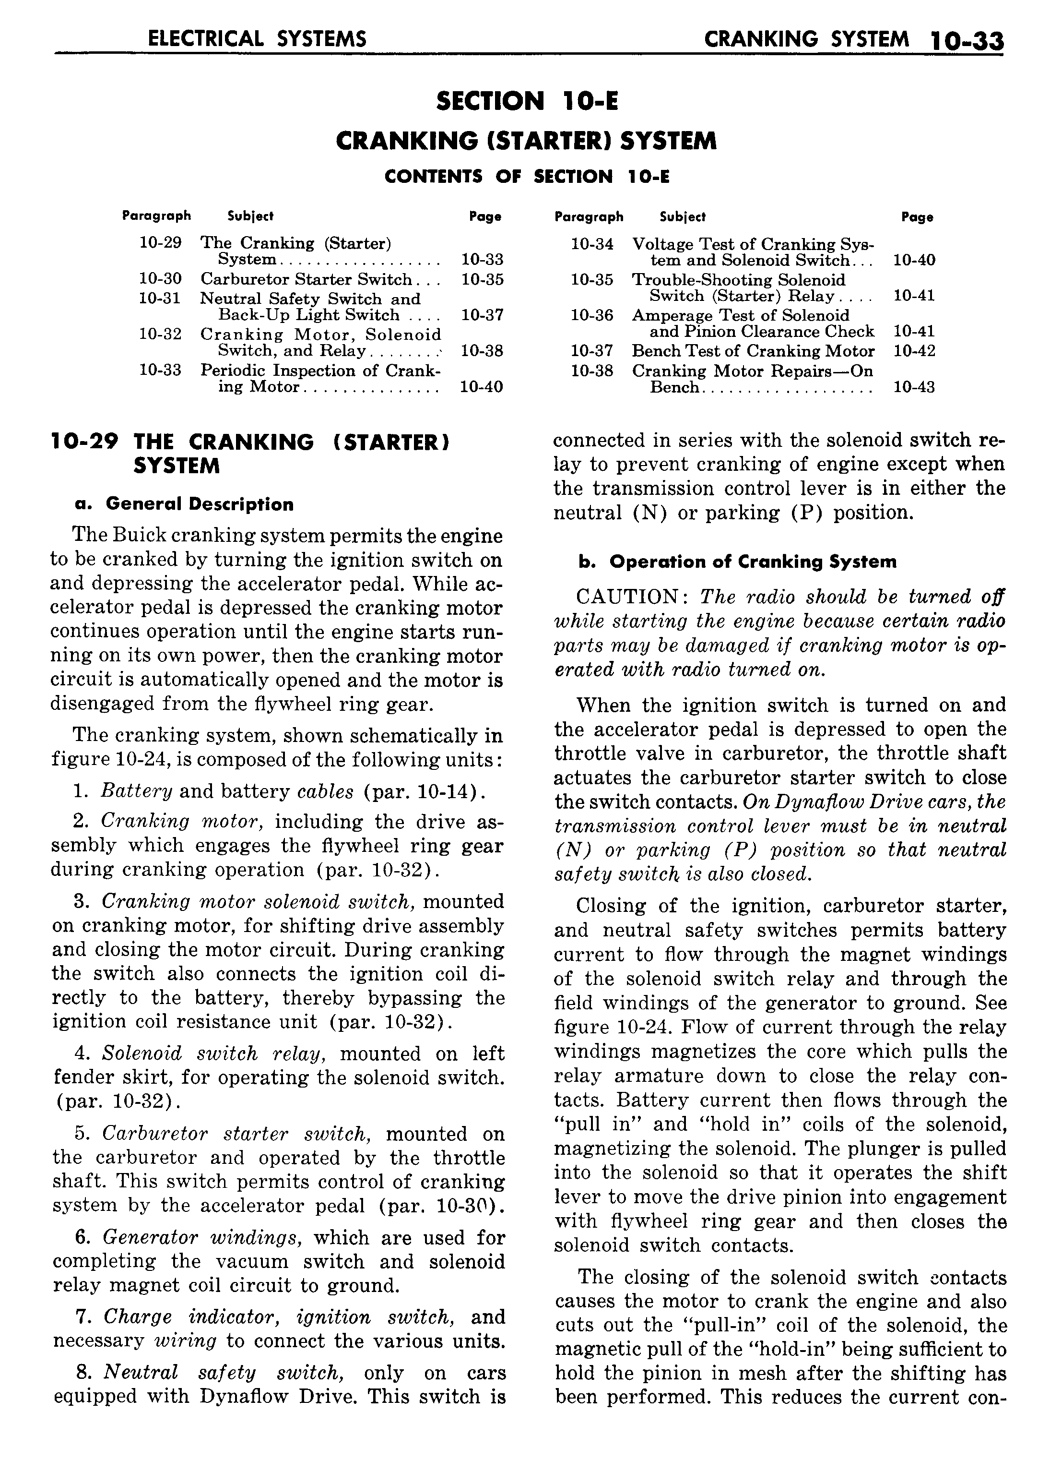 n_11 1957 Buick Shop Manual - Electrical Systems-033-033.jpg